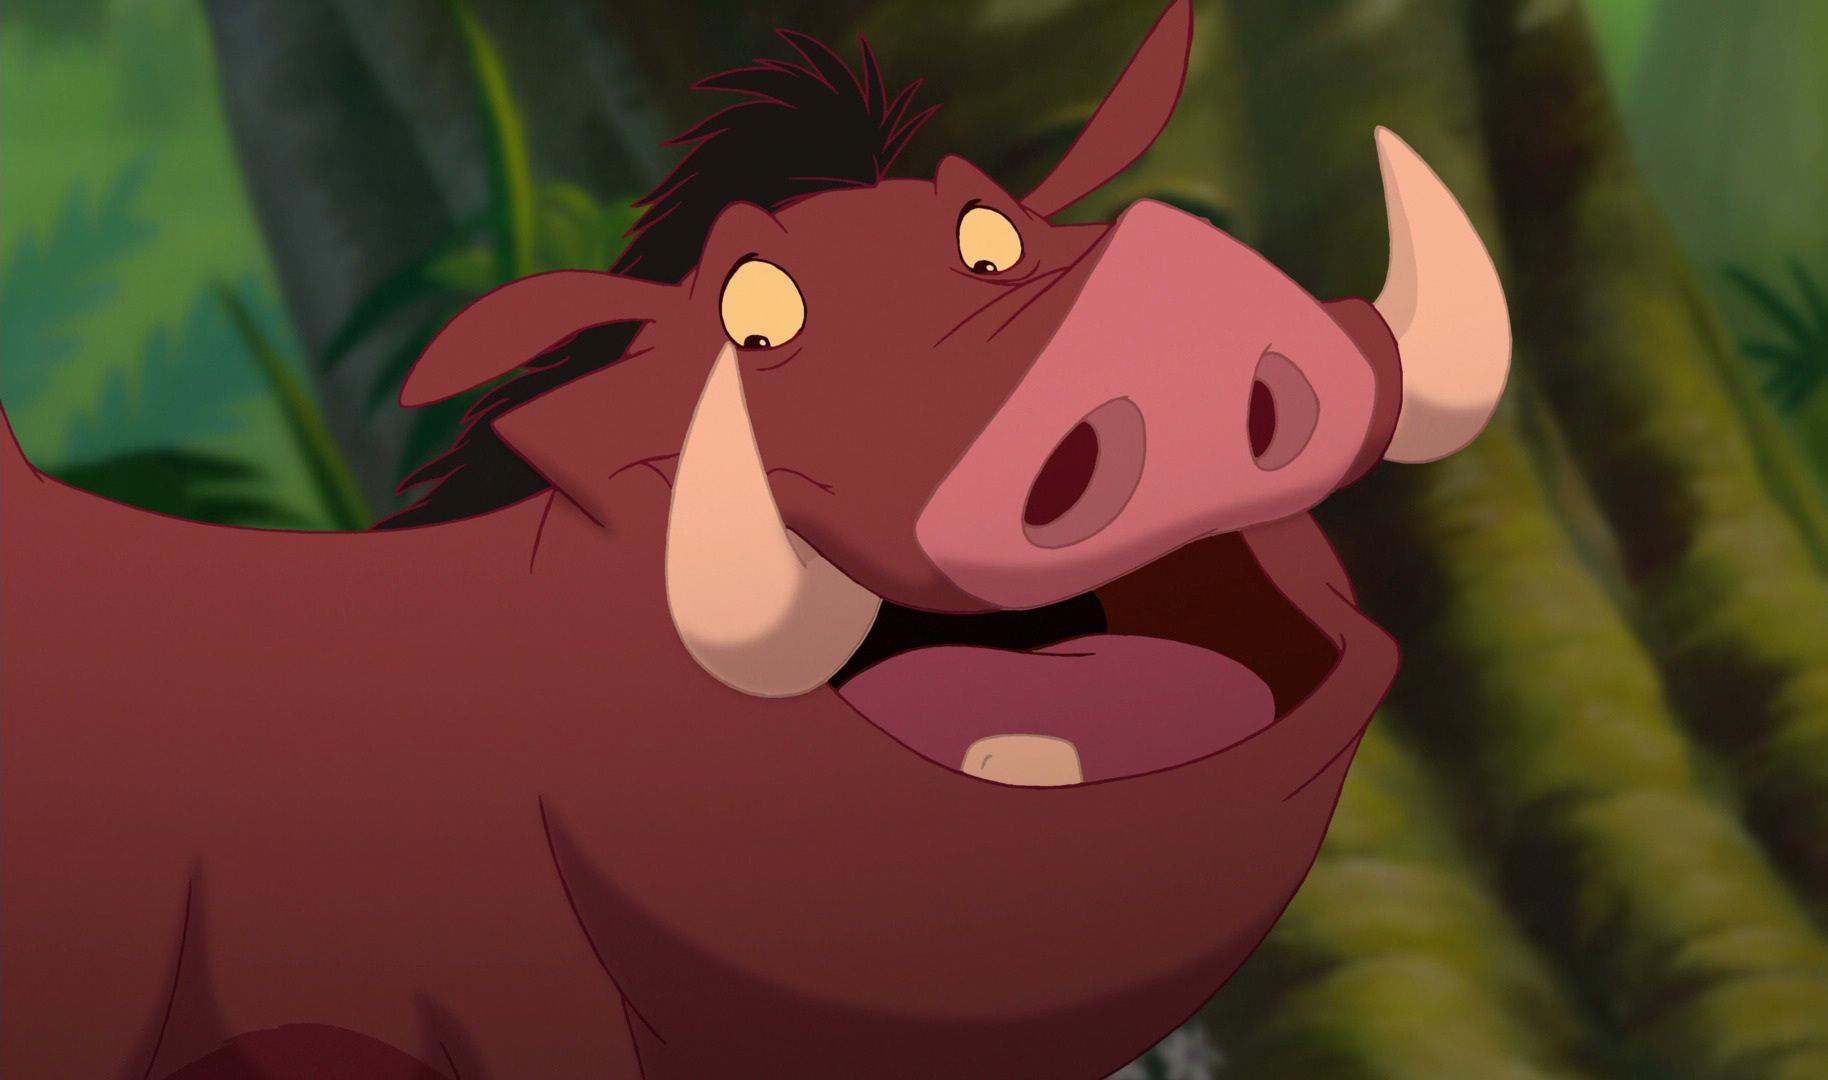 Pumbaa smiling and looking down in The Lion king